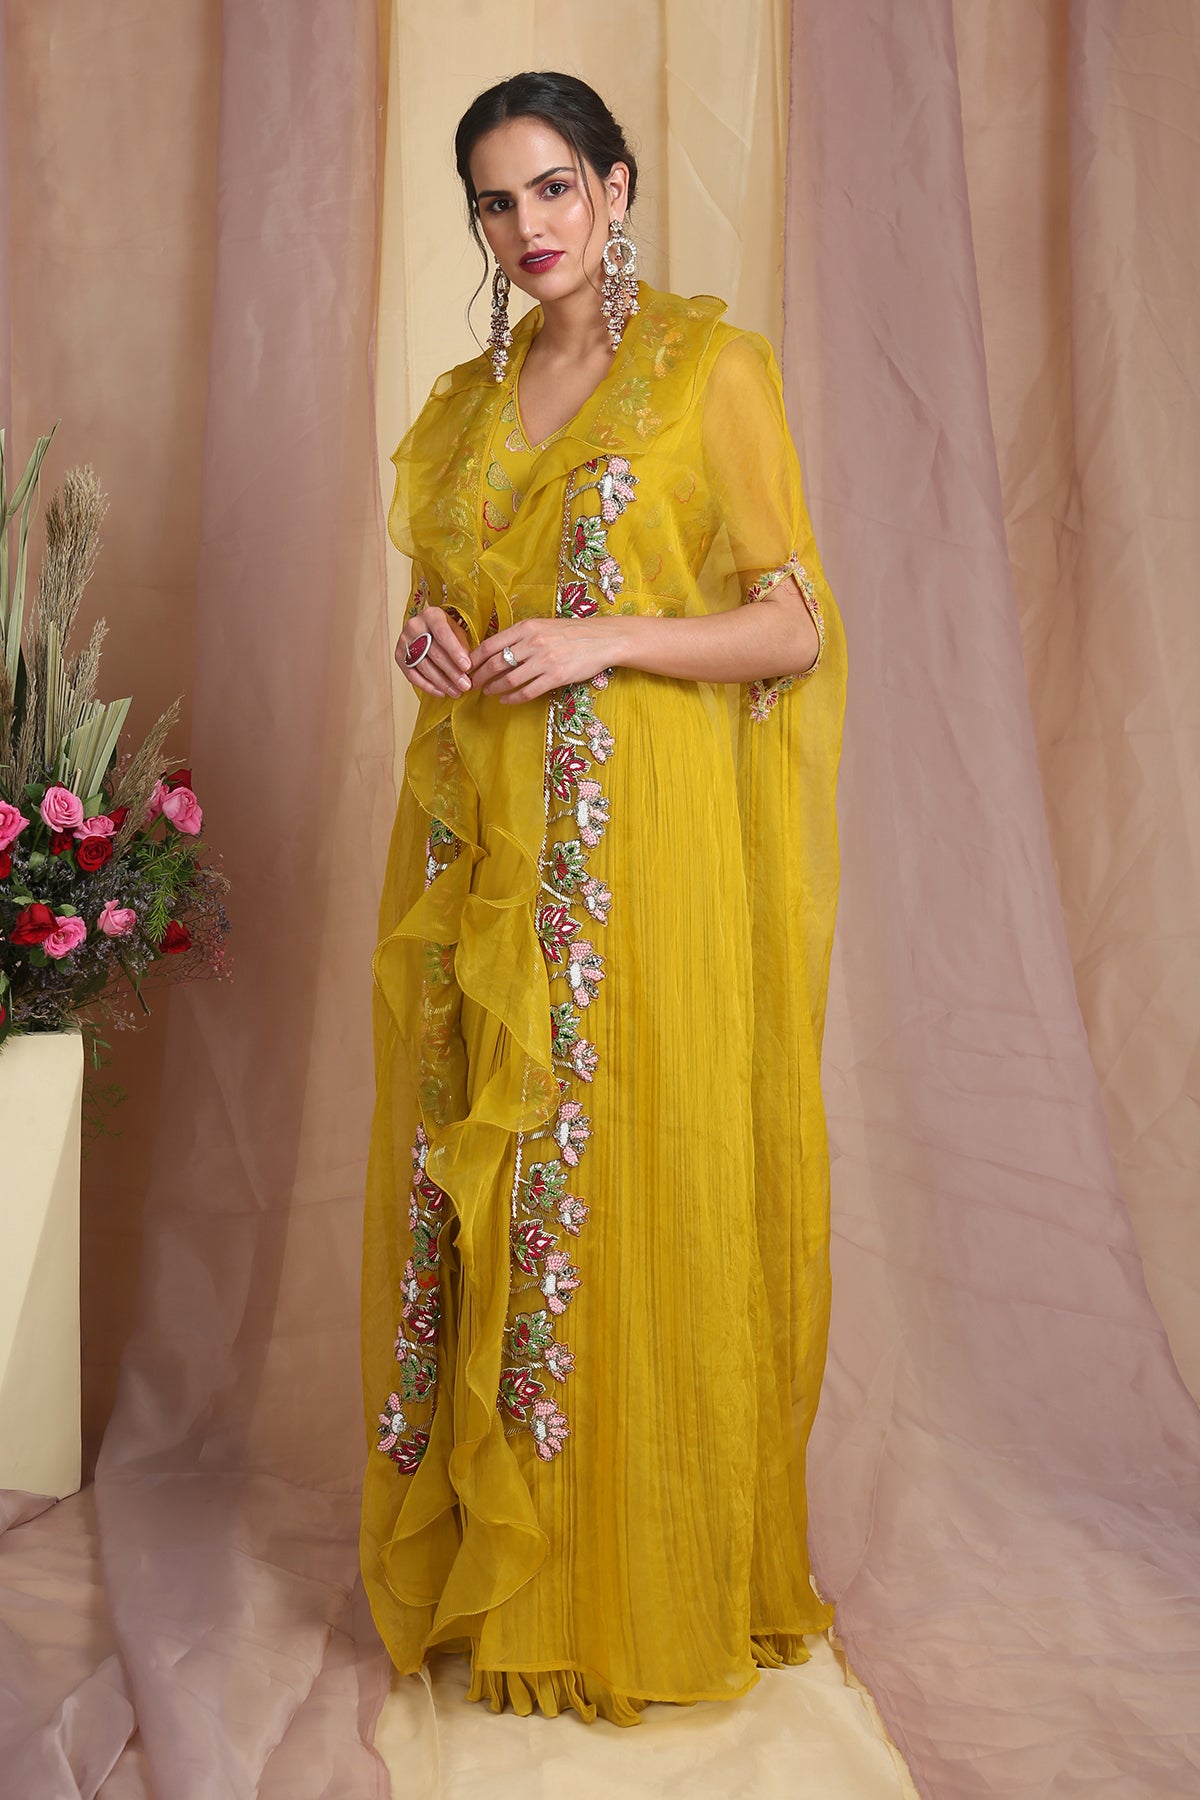 Radiant Yellow Drape Gown With Cape